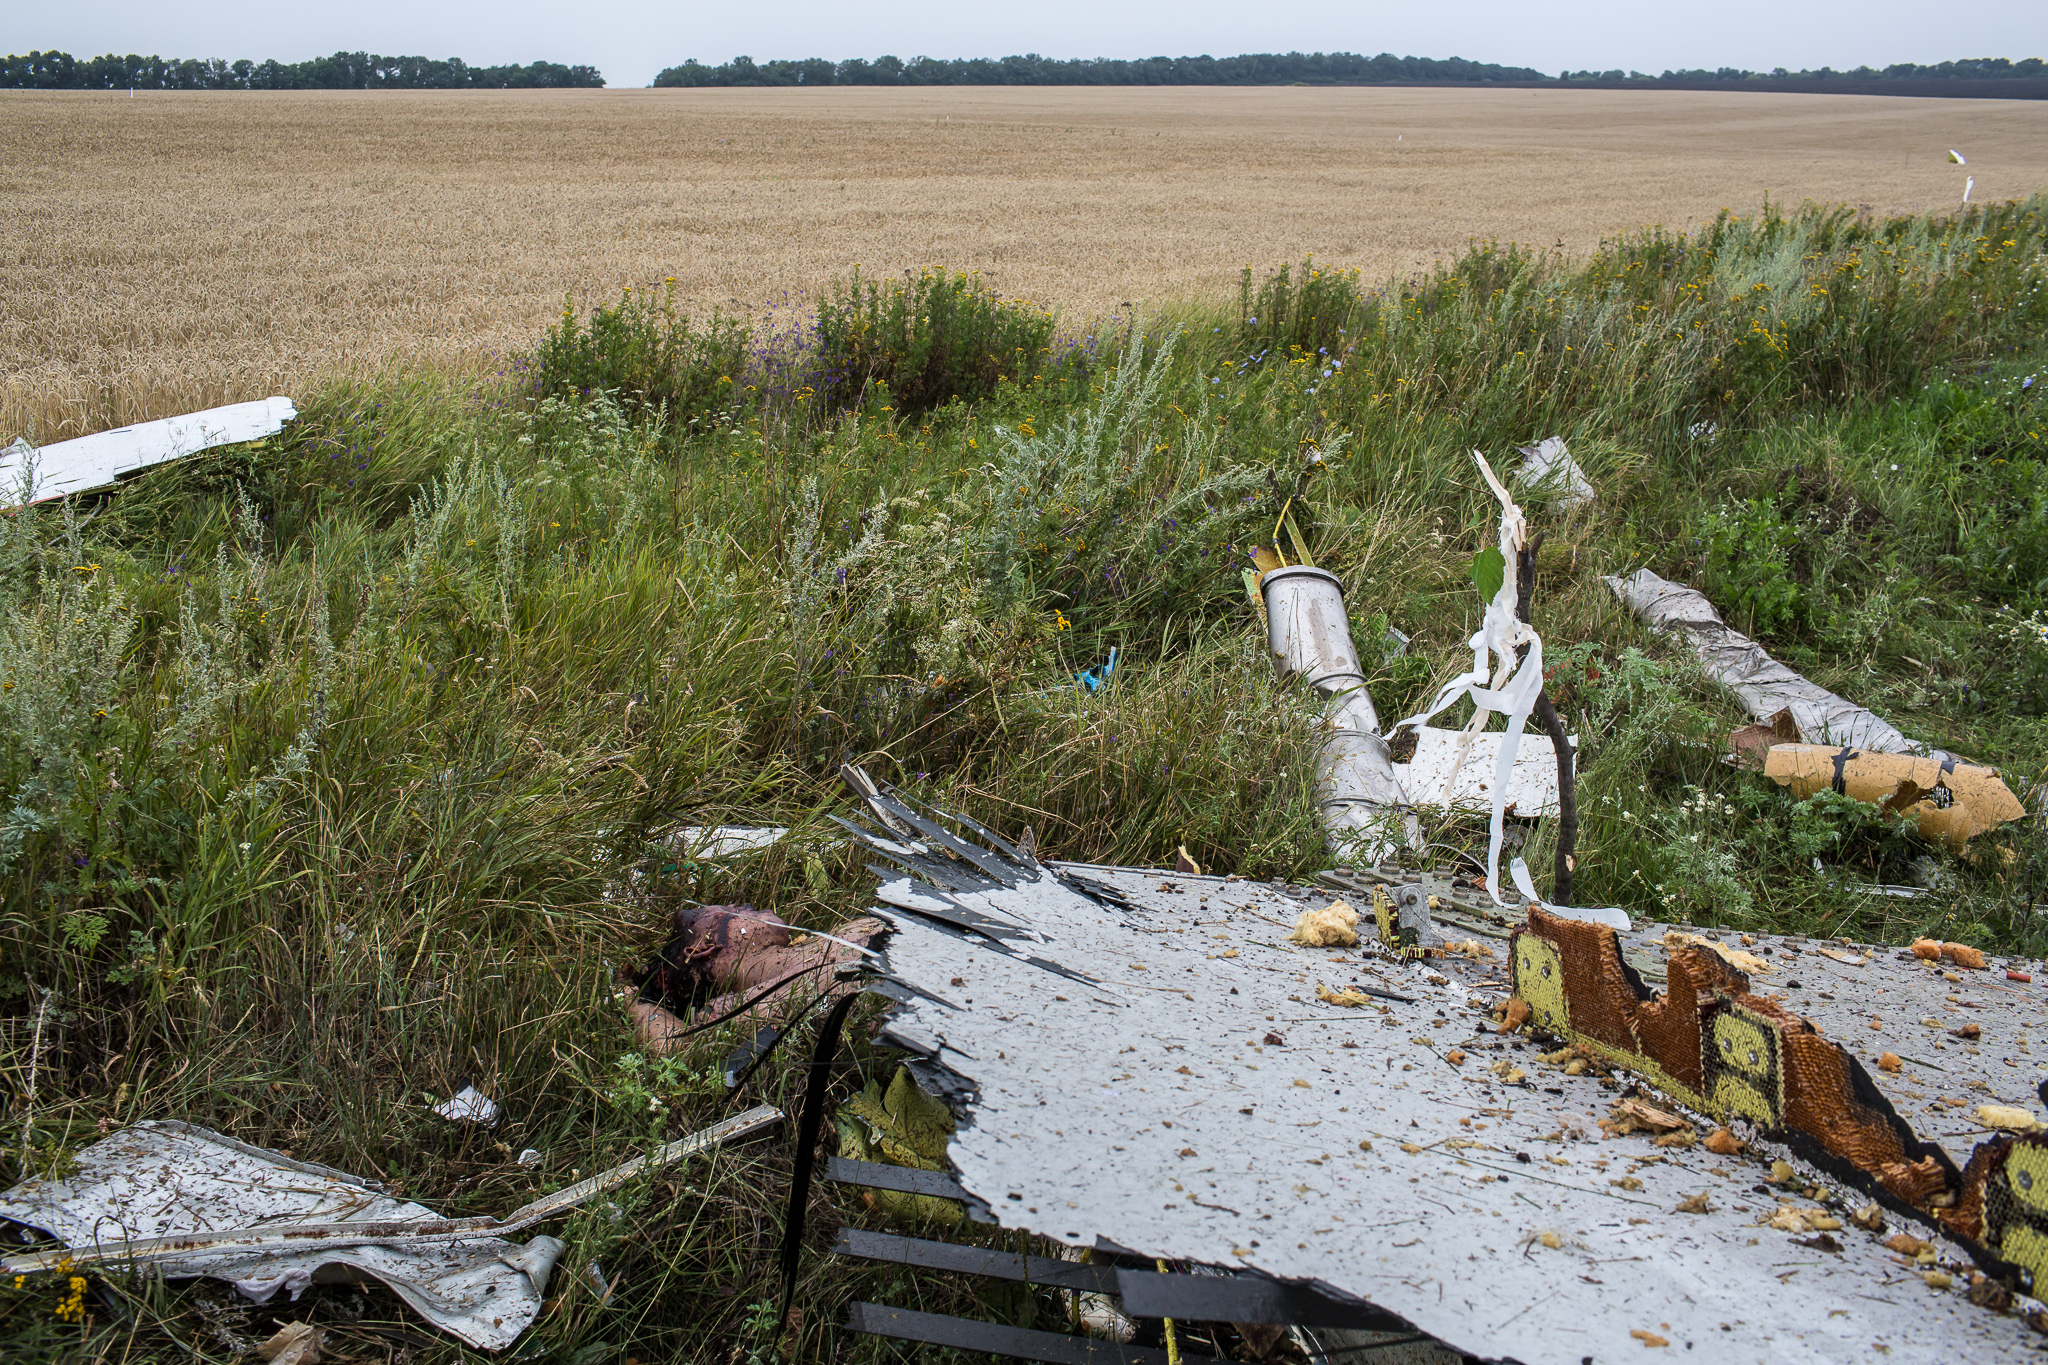  The body of a victim of the crash of Malaysia Airlines flight MH17 lie in a field on July 18, 2014 in Grabovo, Ukraine. Malaysia Airlines flight MH17 travelling from Amsterdam to Kuala Lumpur has crashed on the Ukraine/Russia border near the town of